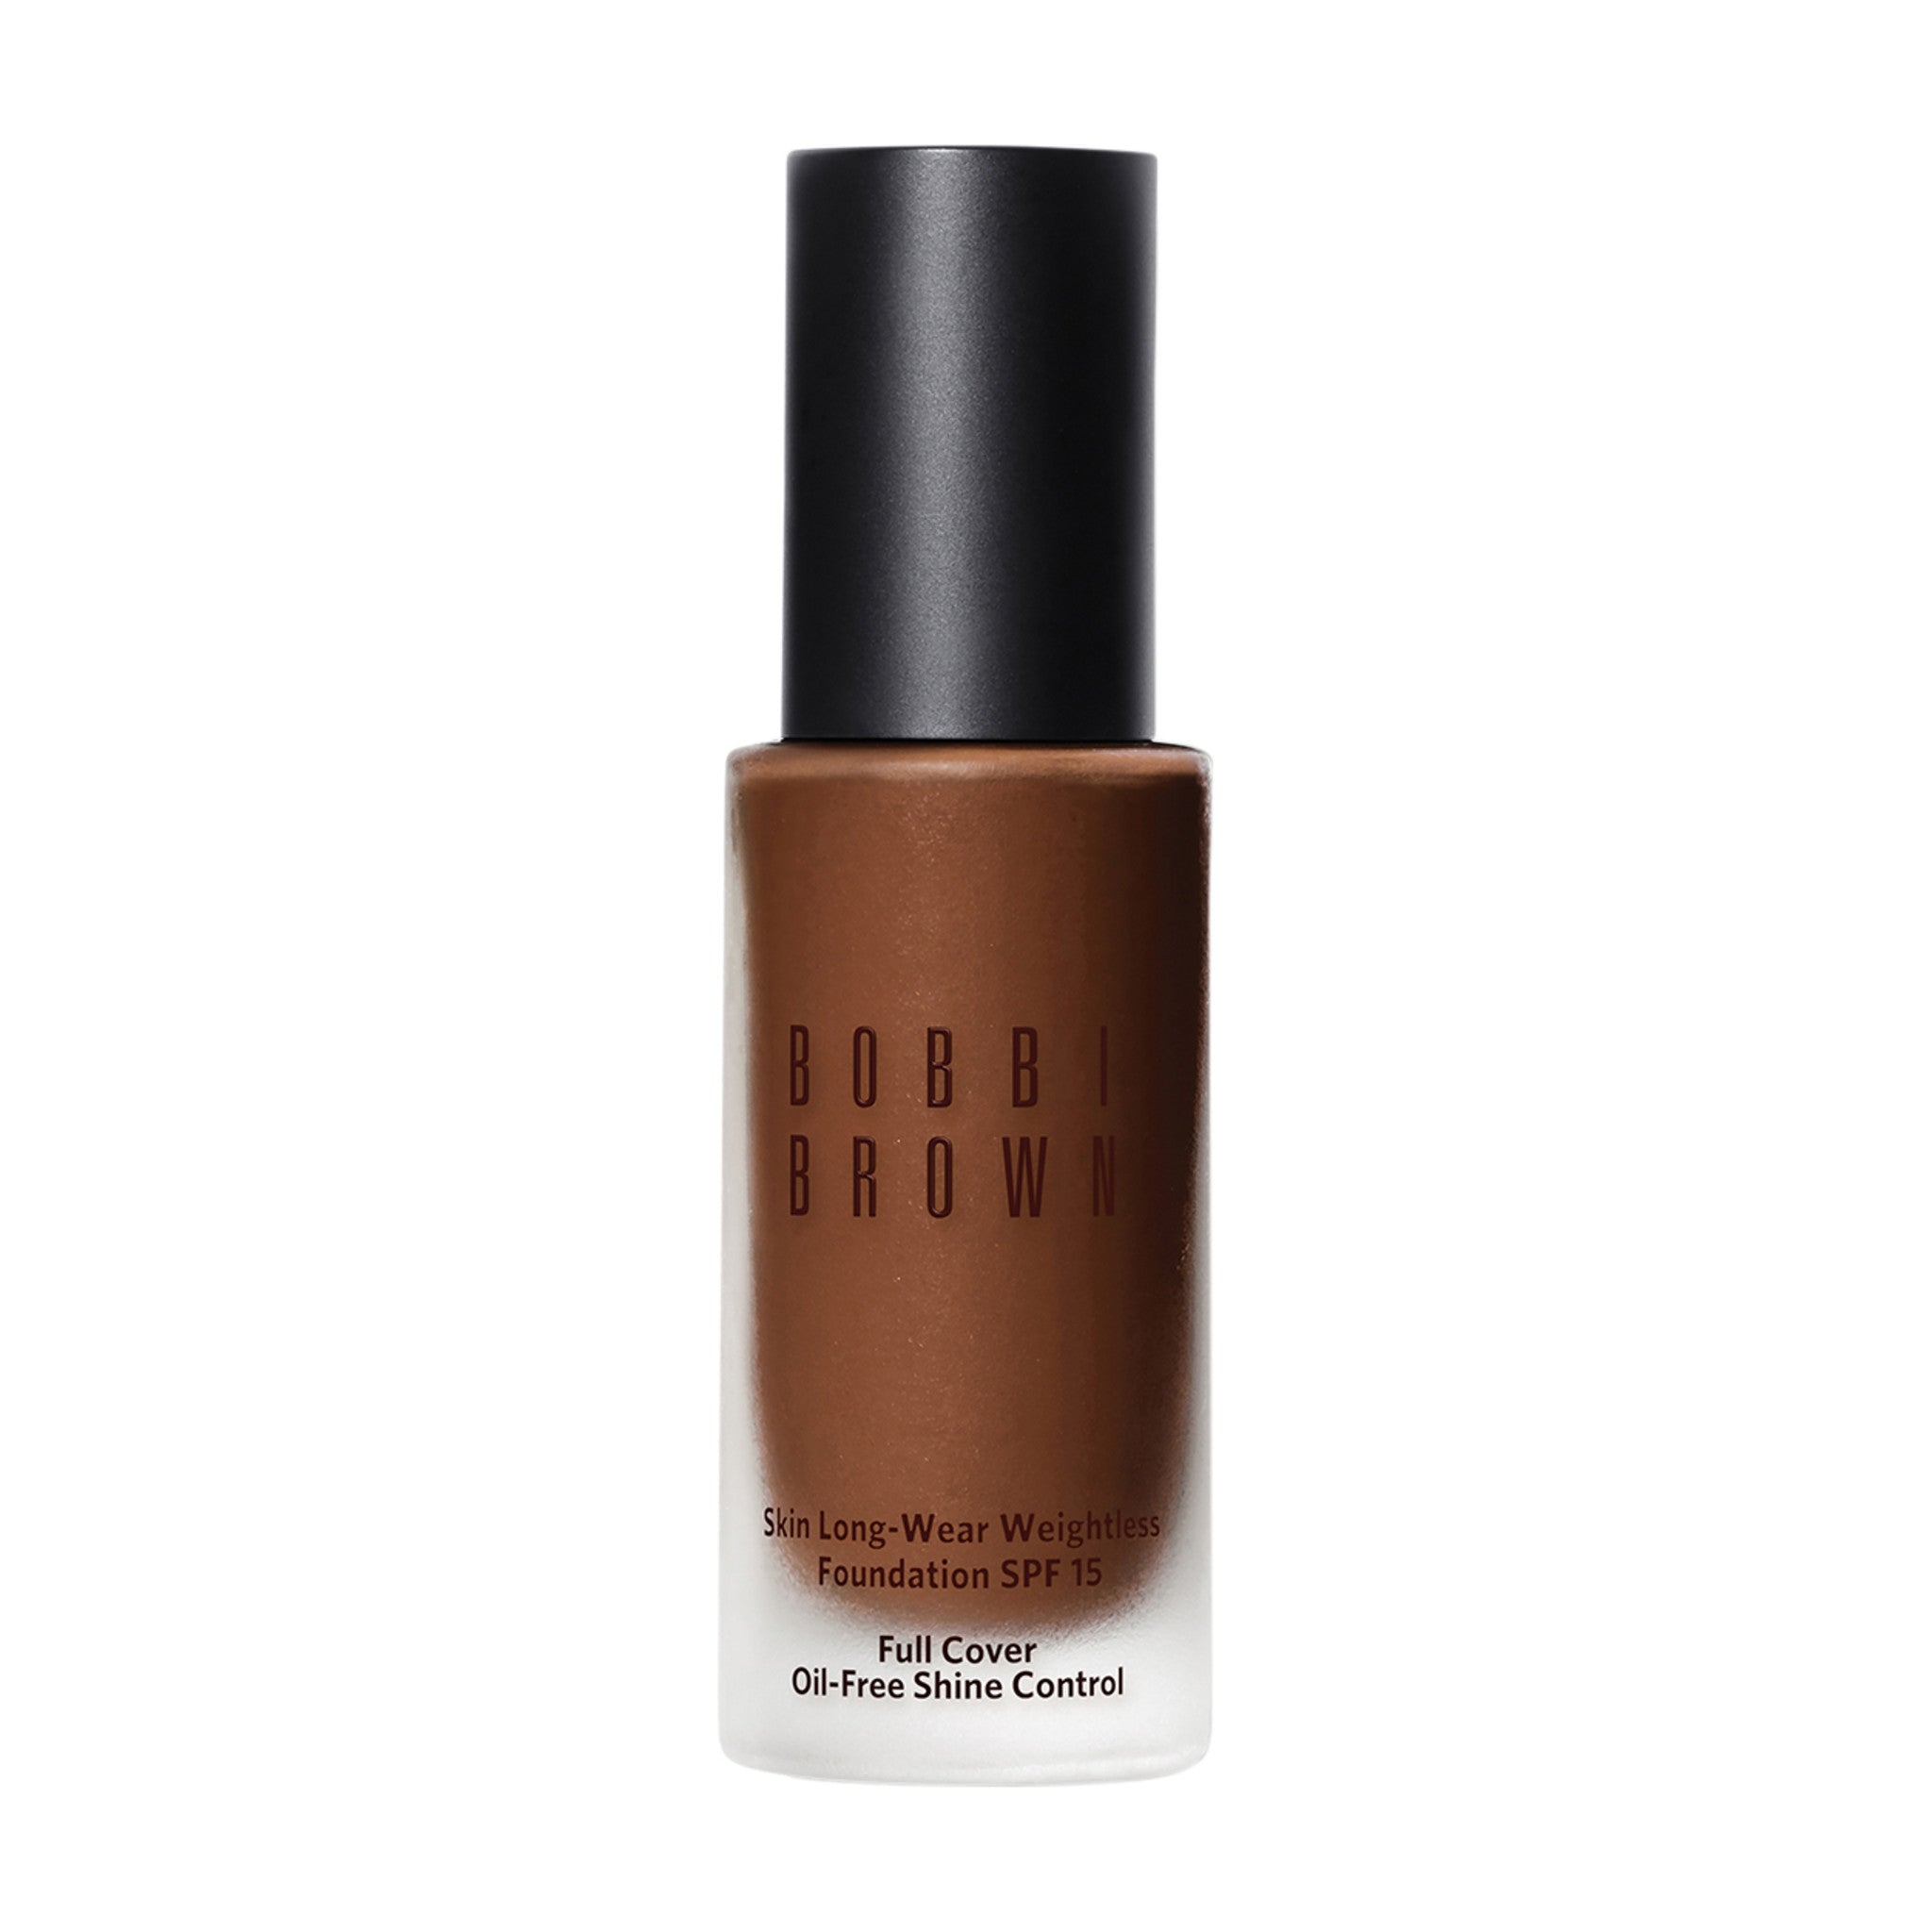 Bobbi Brown Skin Long-Wear Weightless Foundation SPF 15 Color/Shade variant: Neutral Walnut (N-090) main image. This product is in the color nude, for deep neutral peach complexions